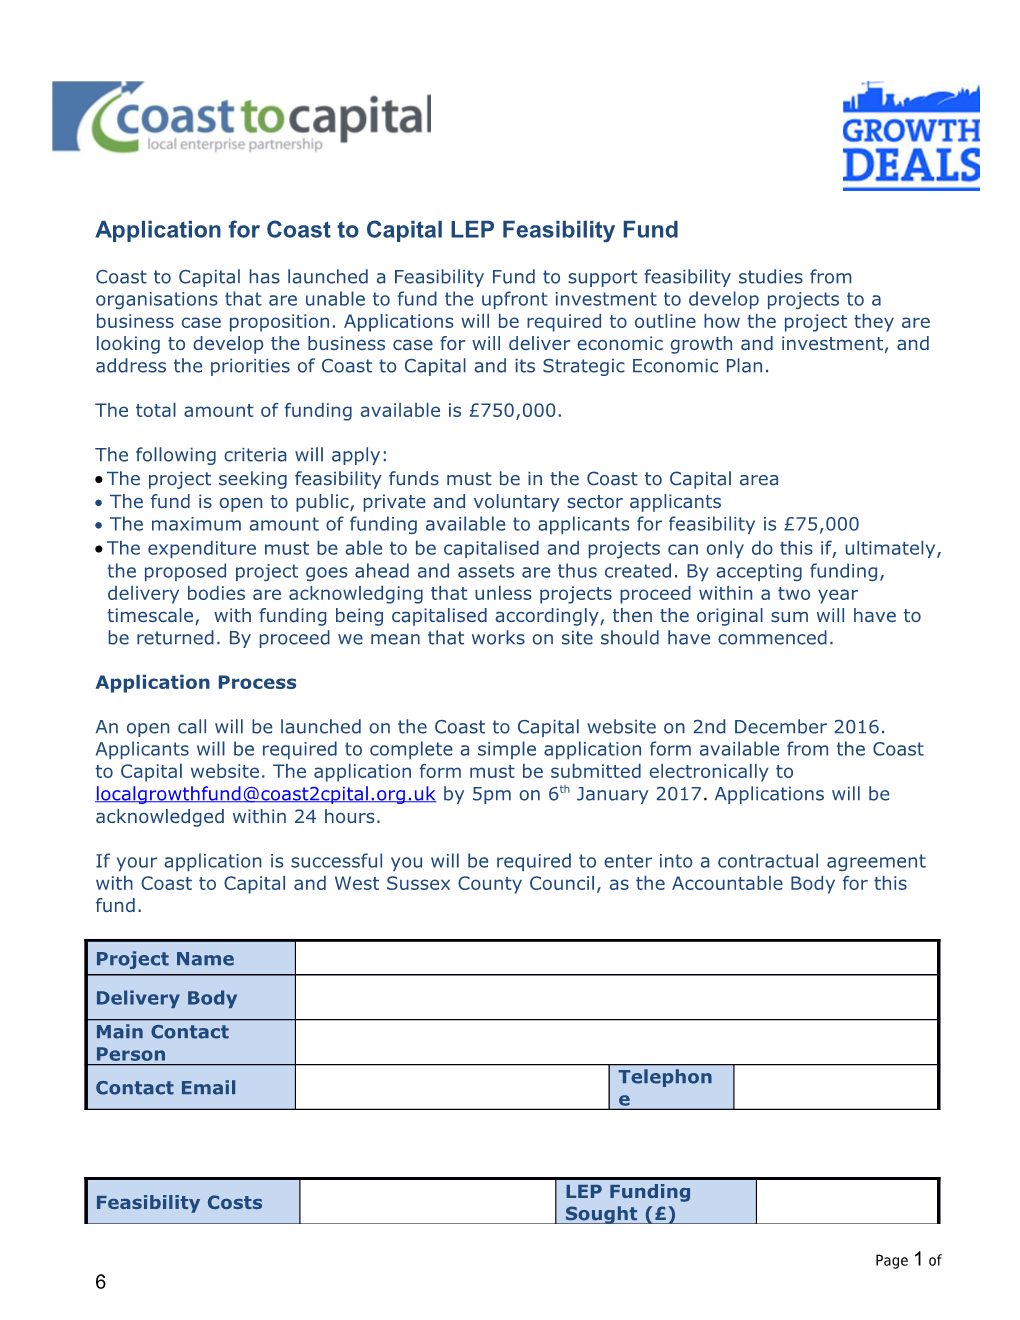 Application for Coast to Capital Lepfeasibility Fund